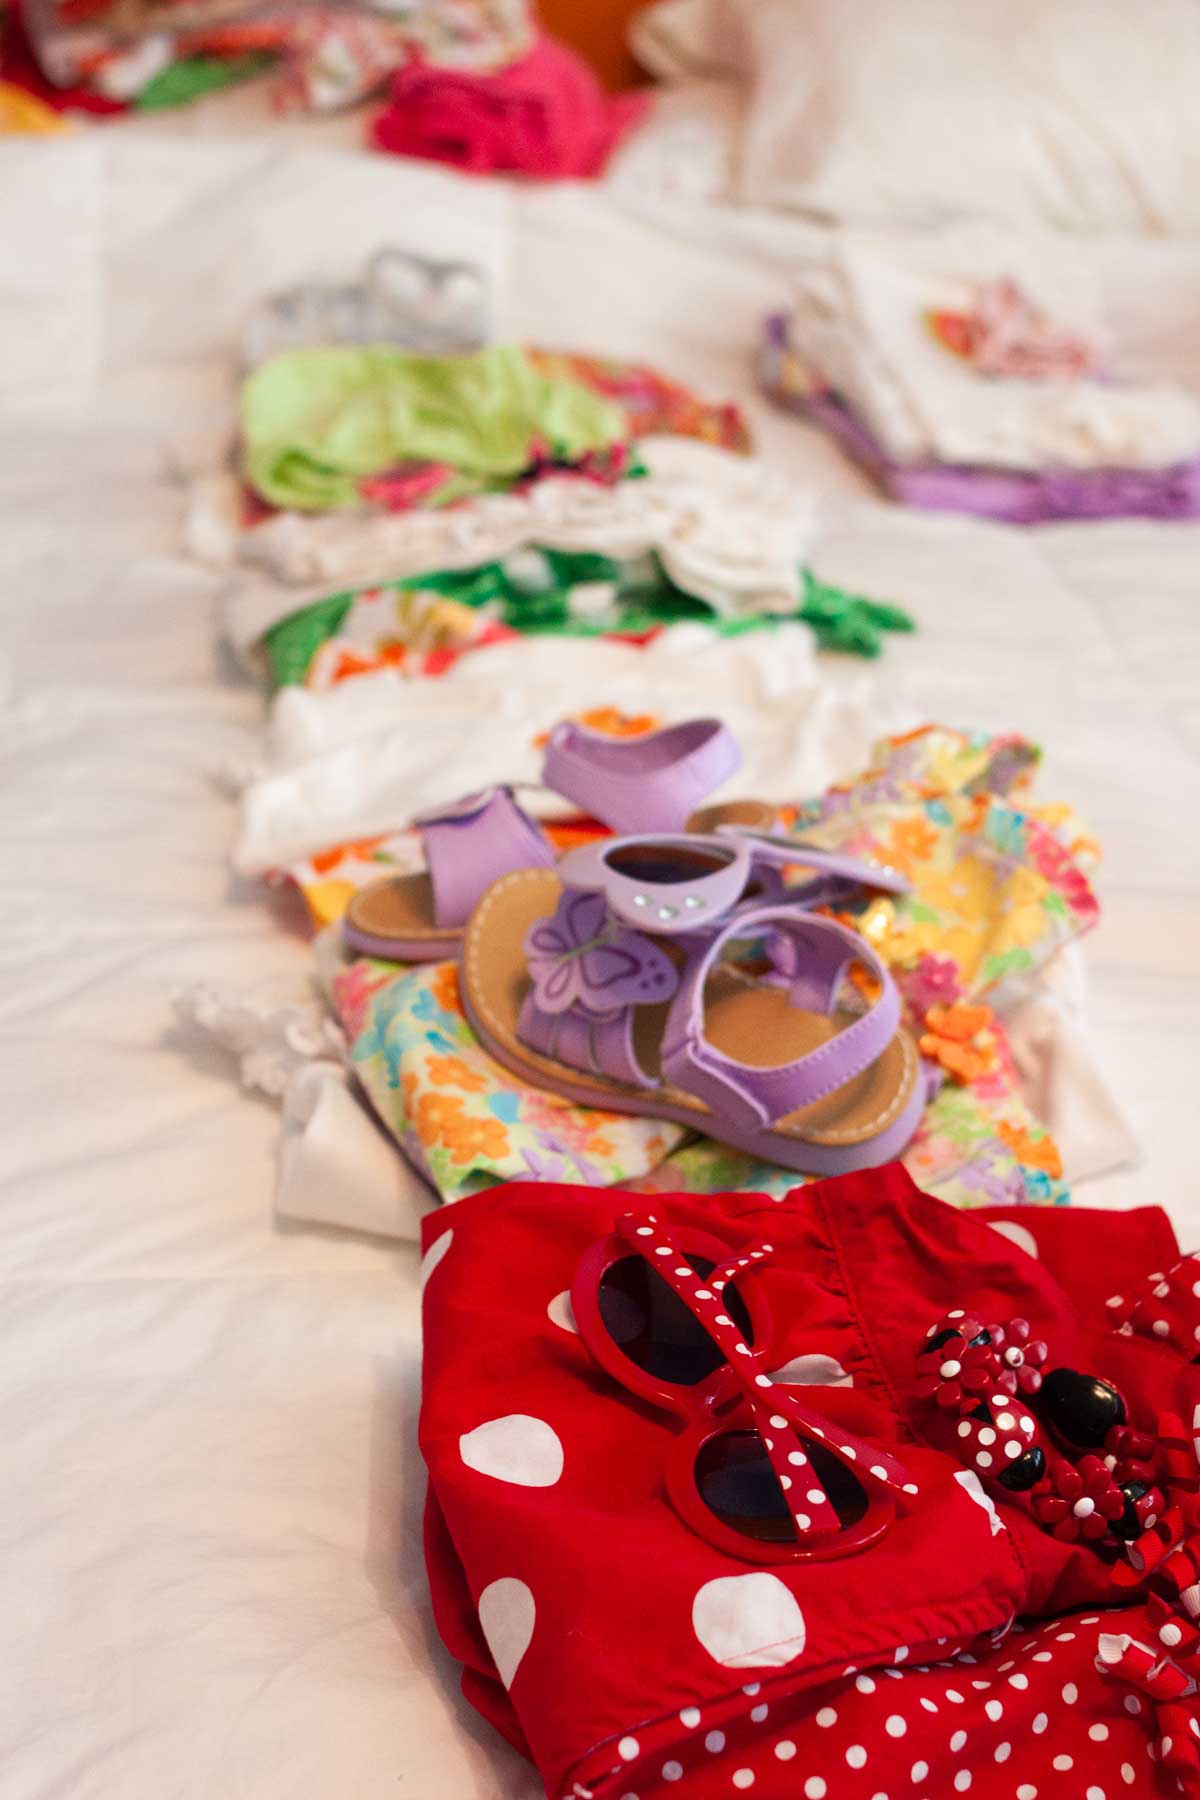 A pile of little girls' clothes and accessories are on a bed.